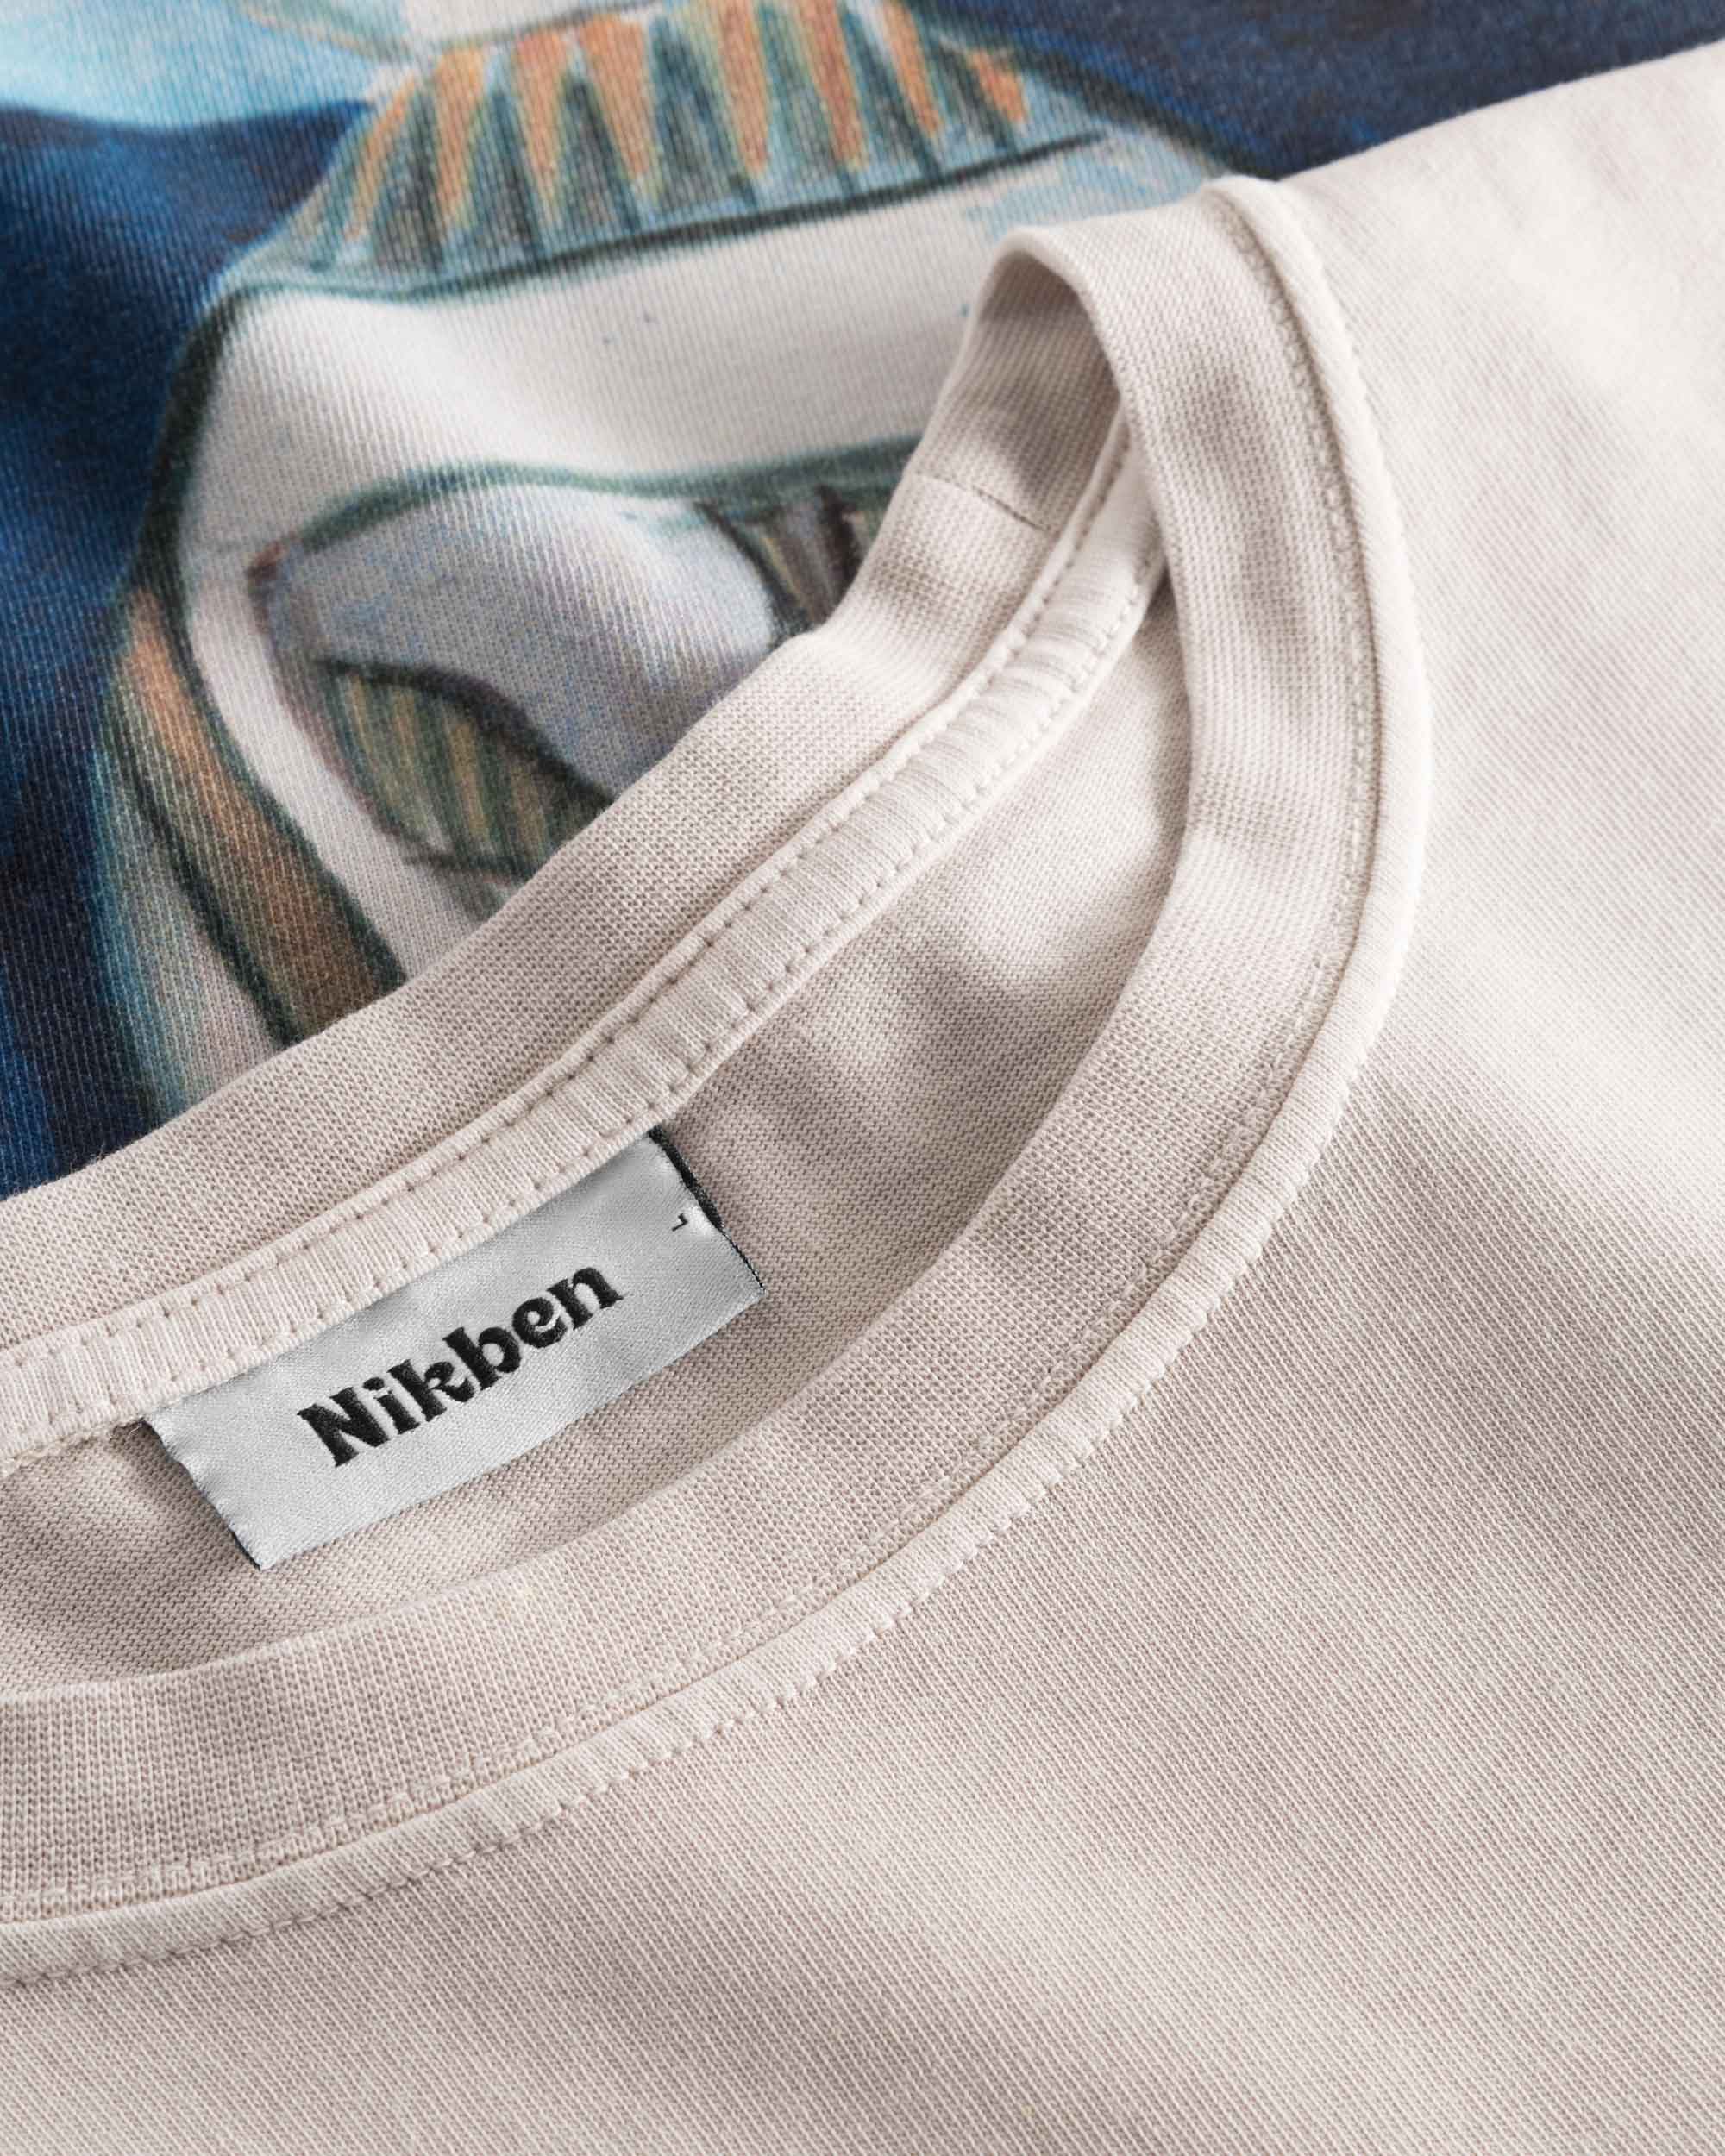 Close-up view of the round neck and stitchings on a creme and blue colored t-shirt